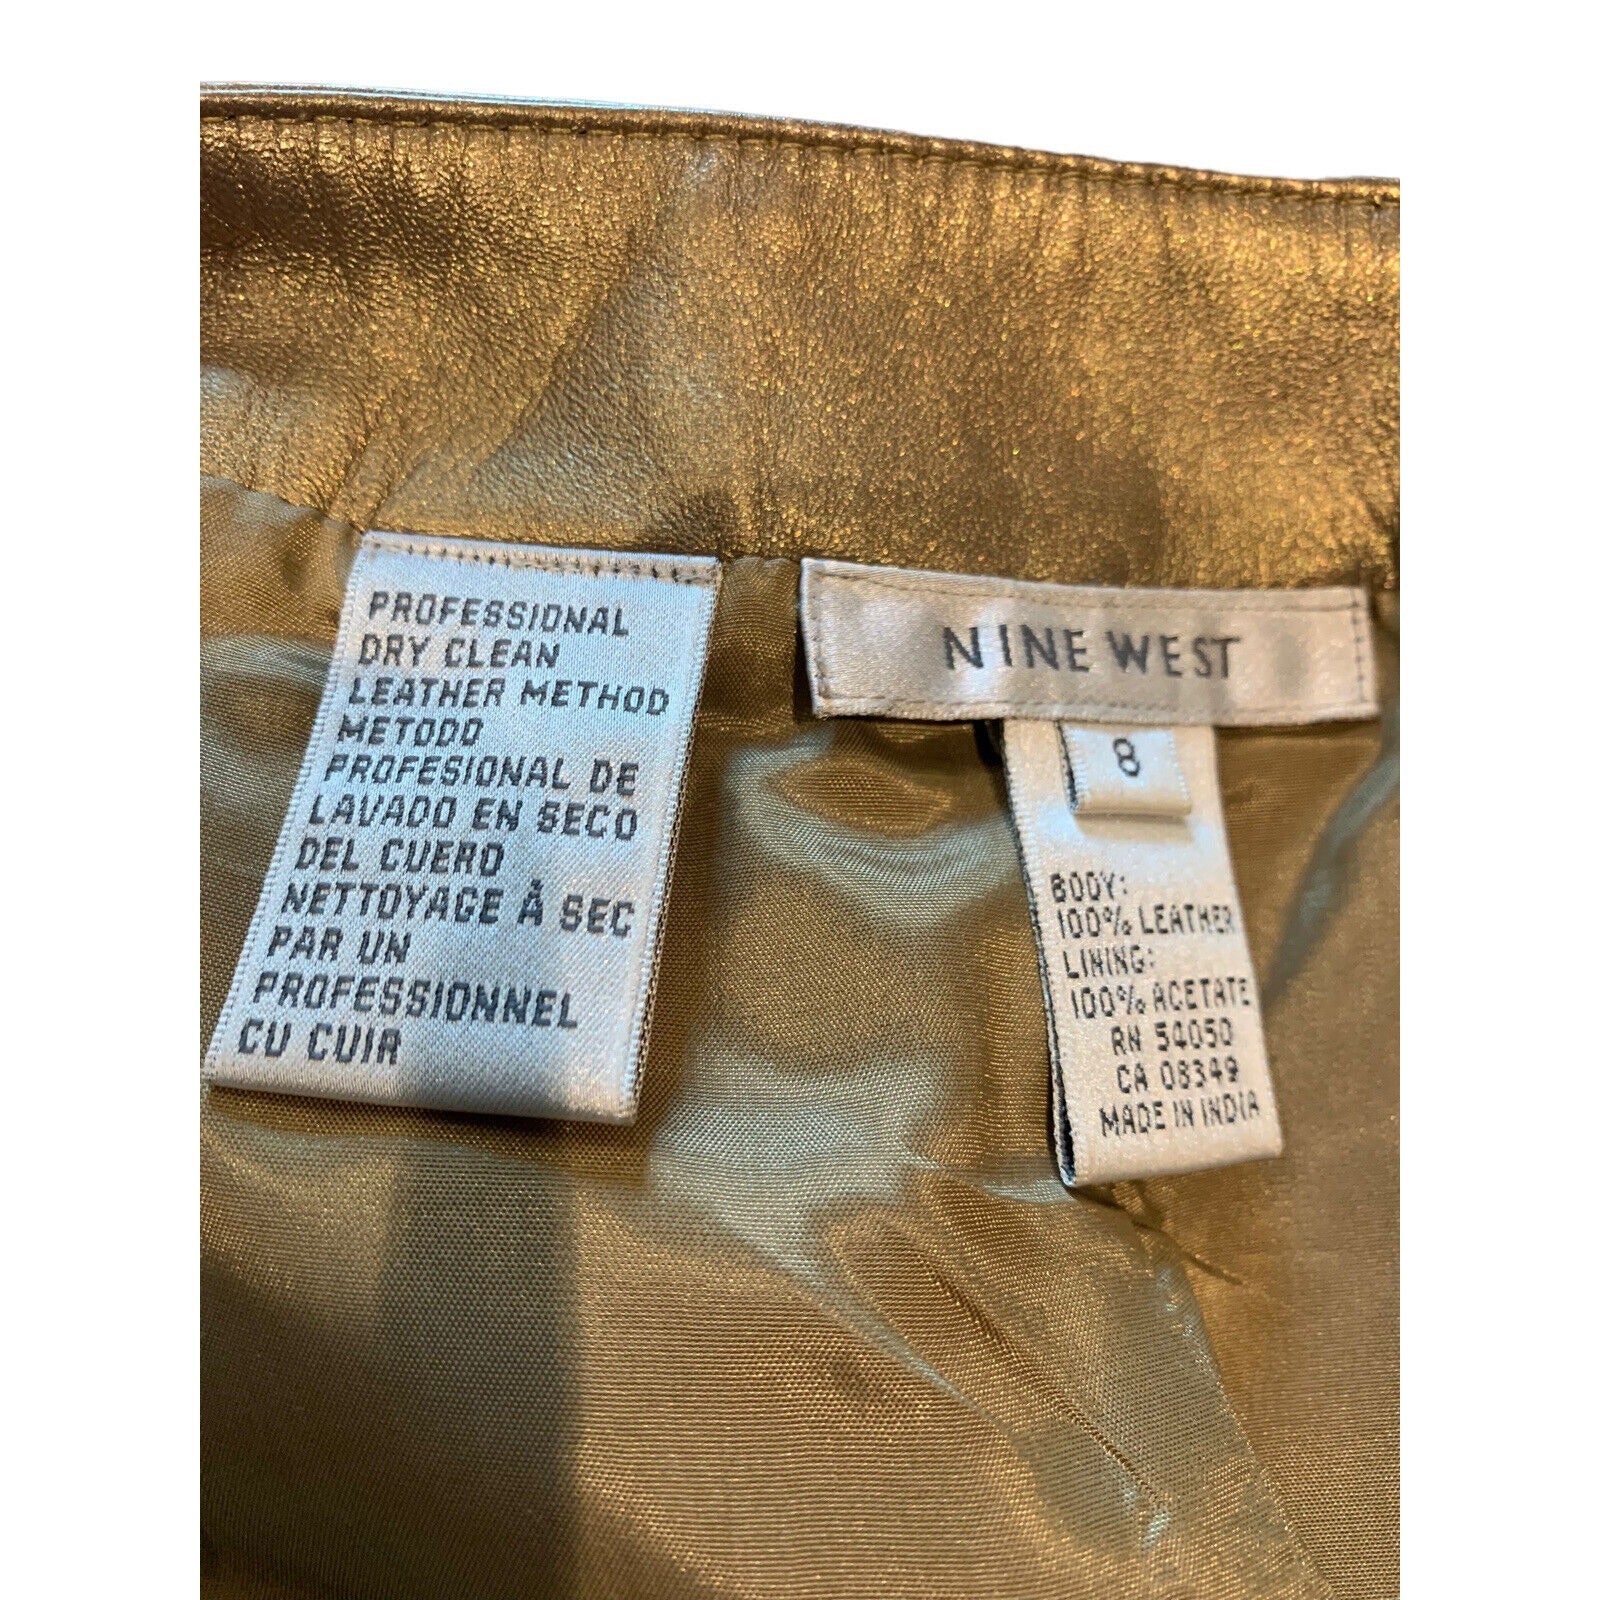 Closeup Of Product Tag And Care Instructions